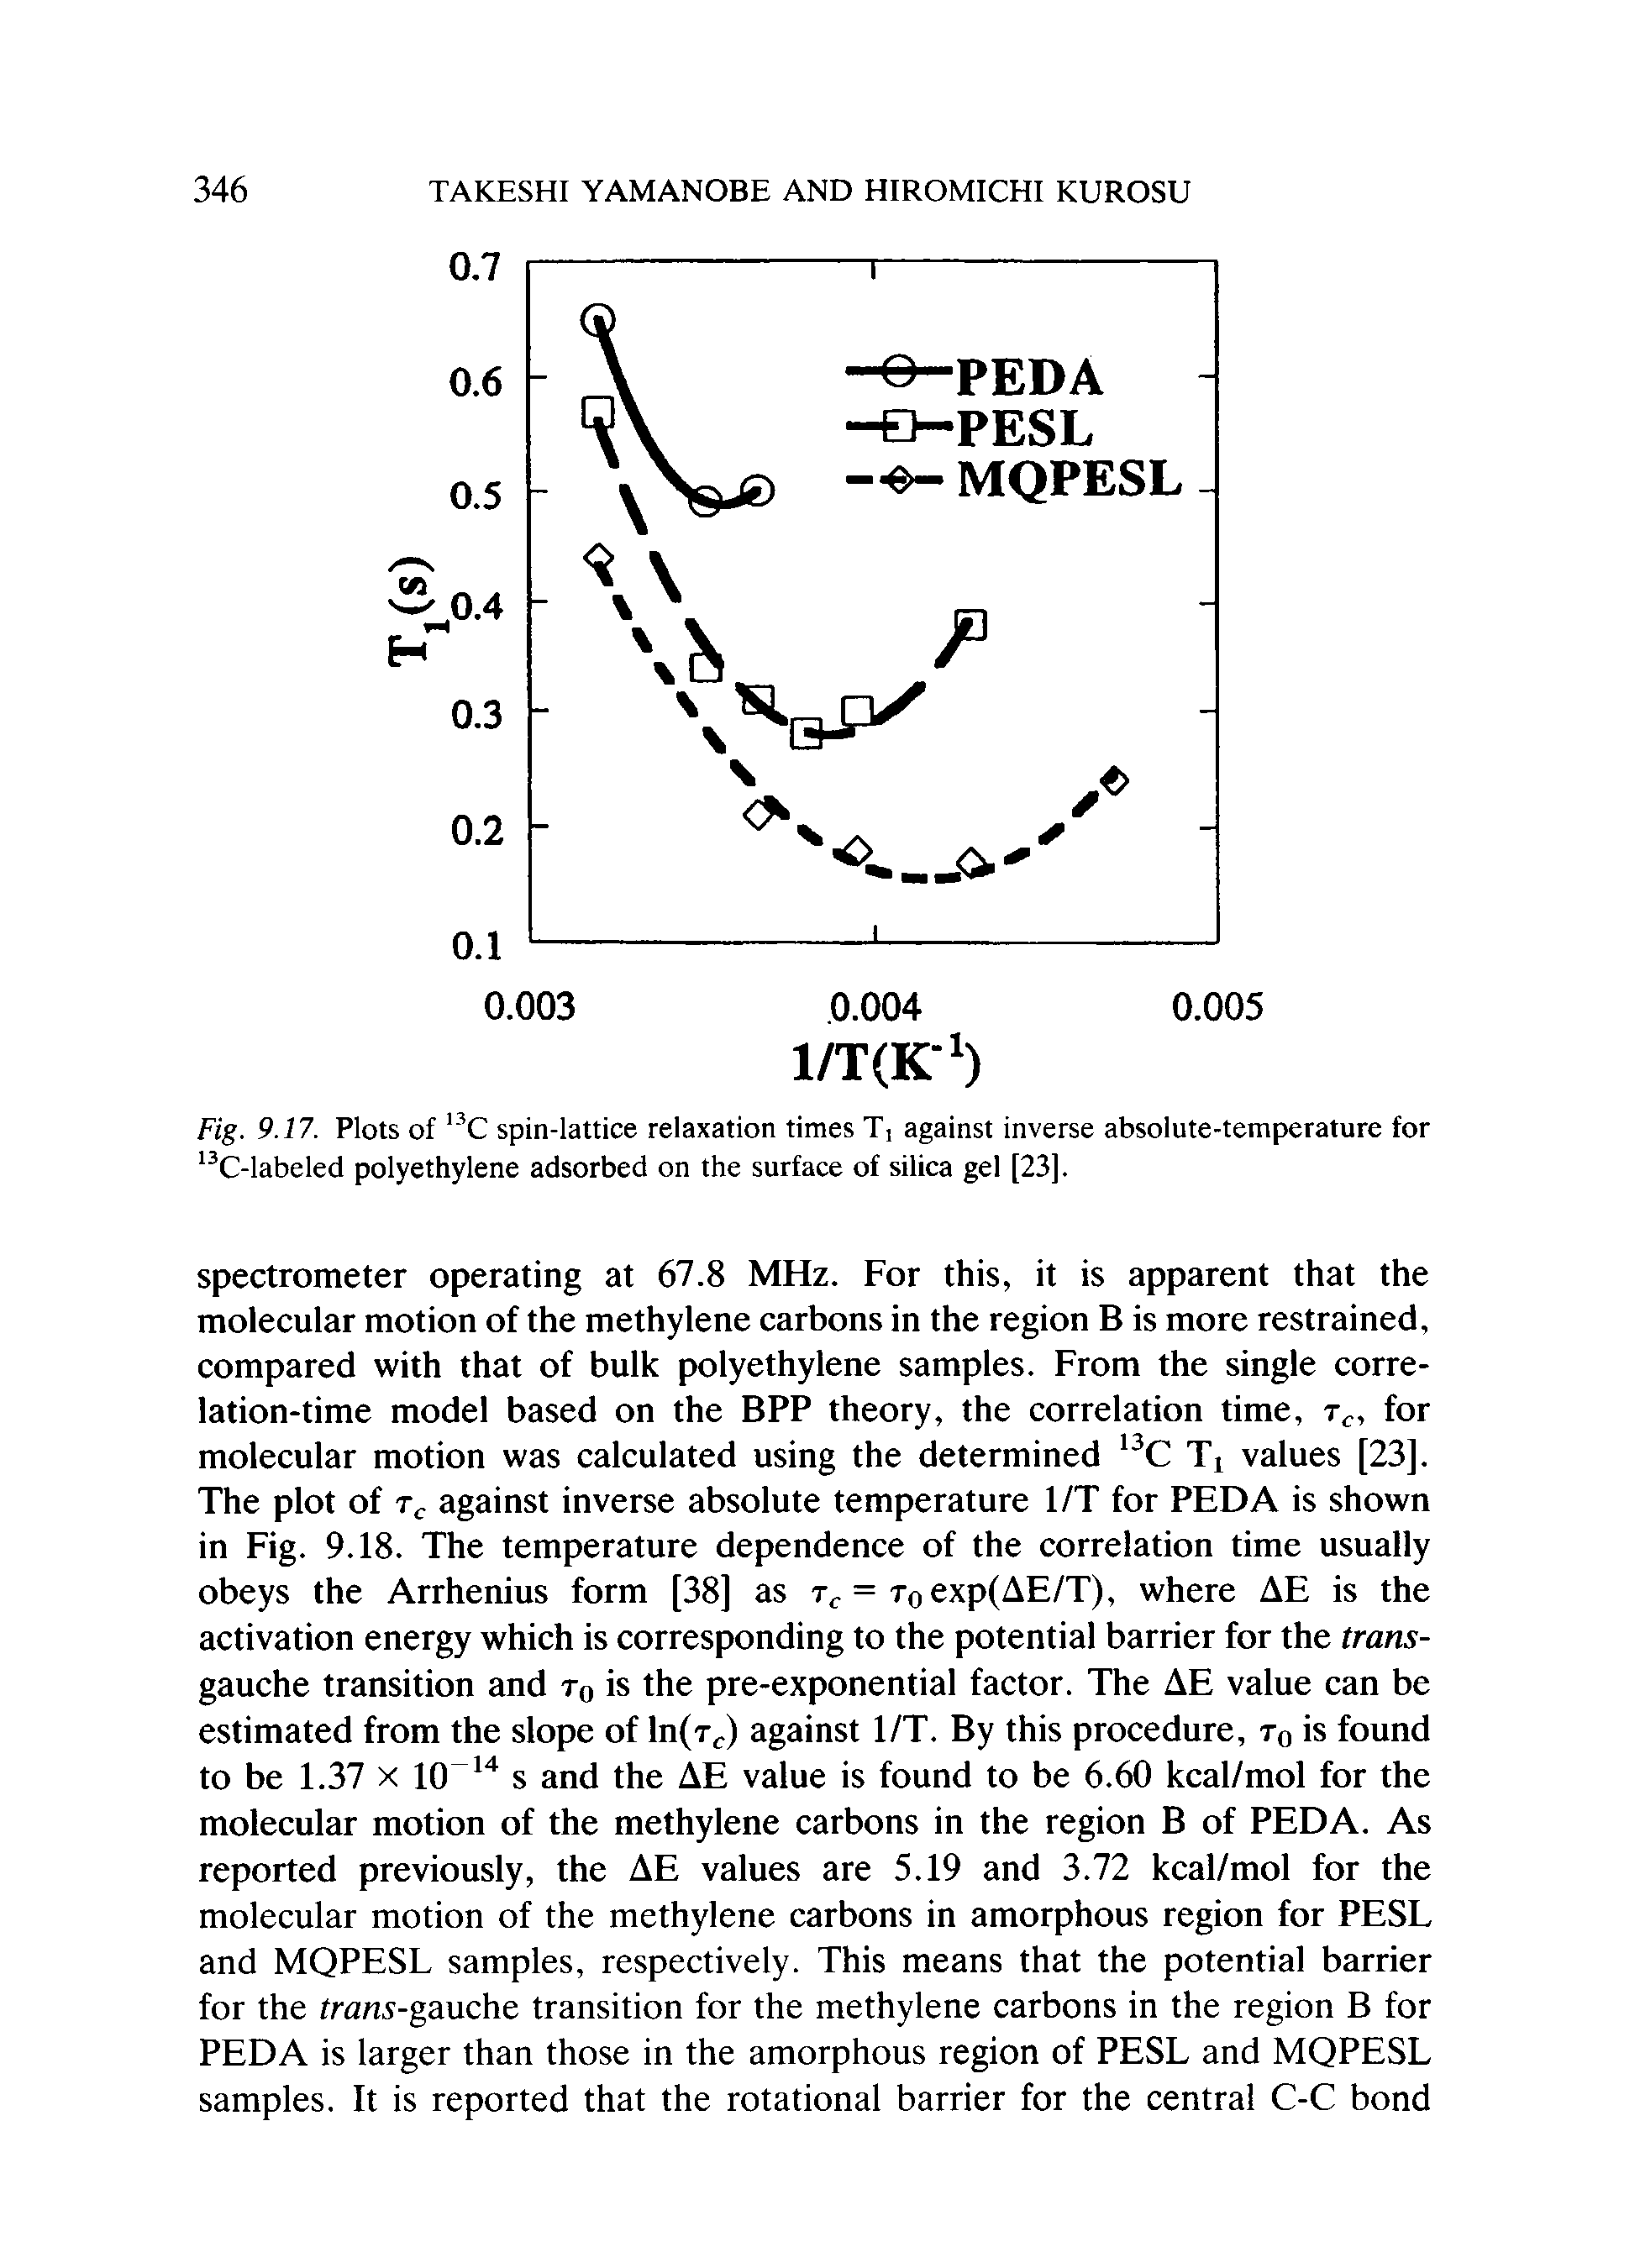 Fig. 9.17. Plots of C spin-lattice relaxation times Ti against inverse absolute-temperature for C-labeled polyethylene adsorbed on the surface of silica gel [23].